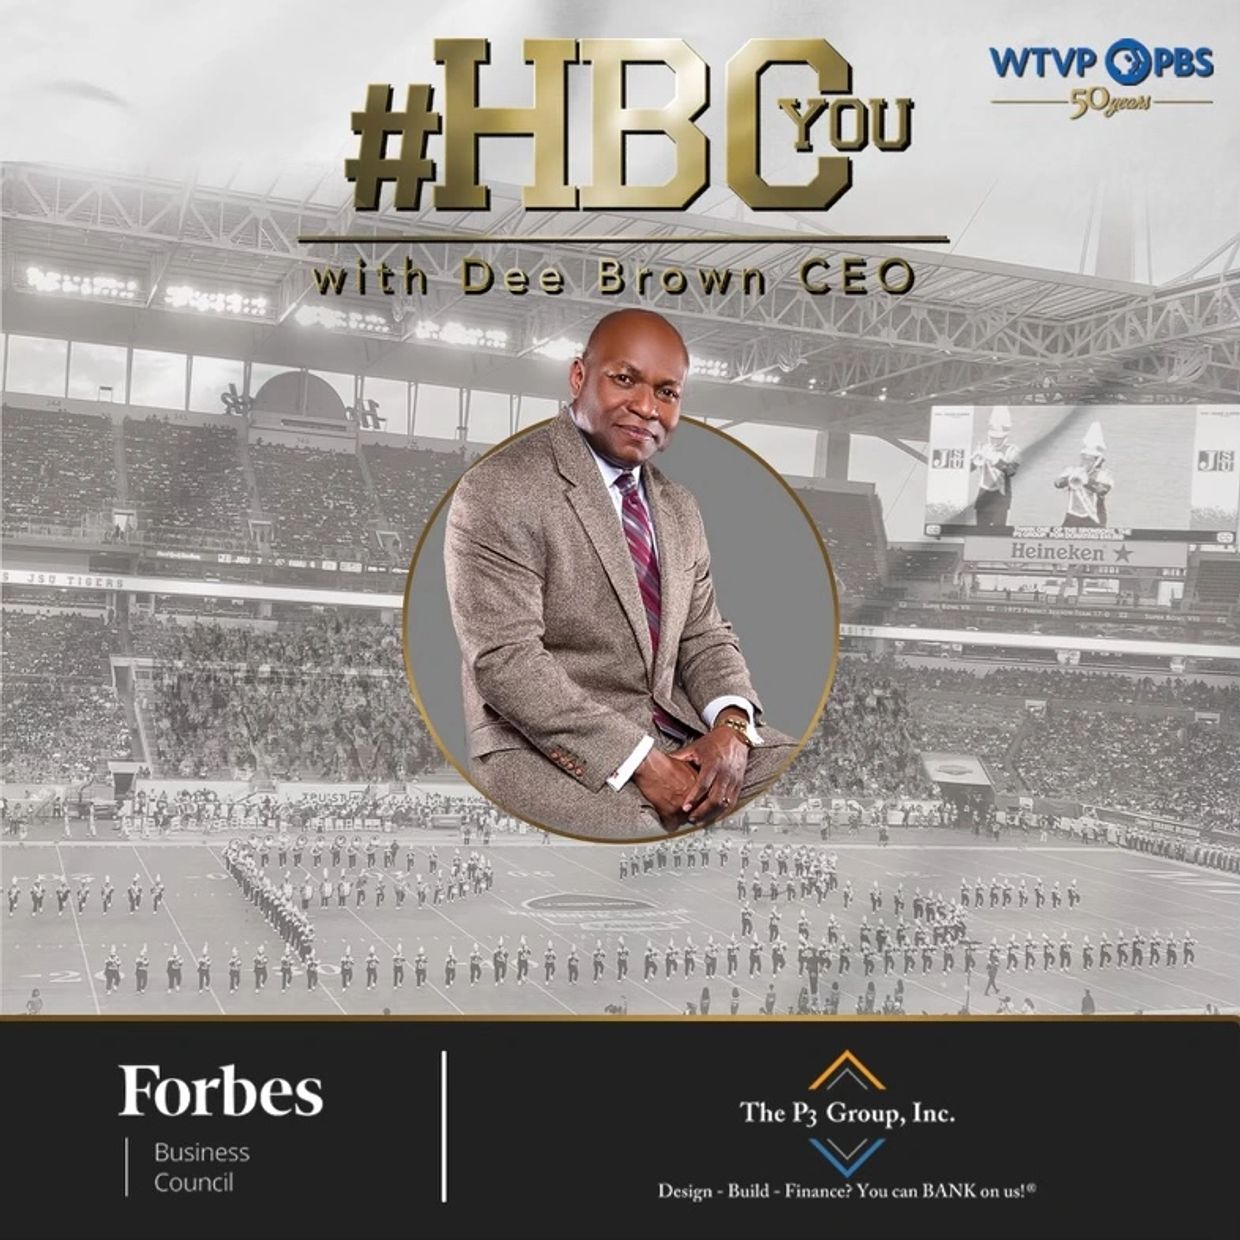 Dee Brown CEO, Dee Brown is the President & CEO of The P3 Group and talk show host. 